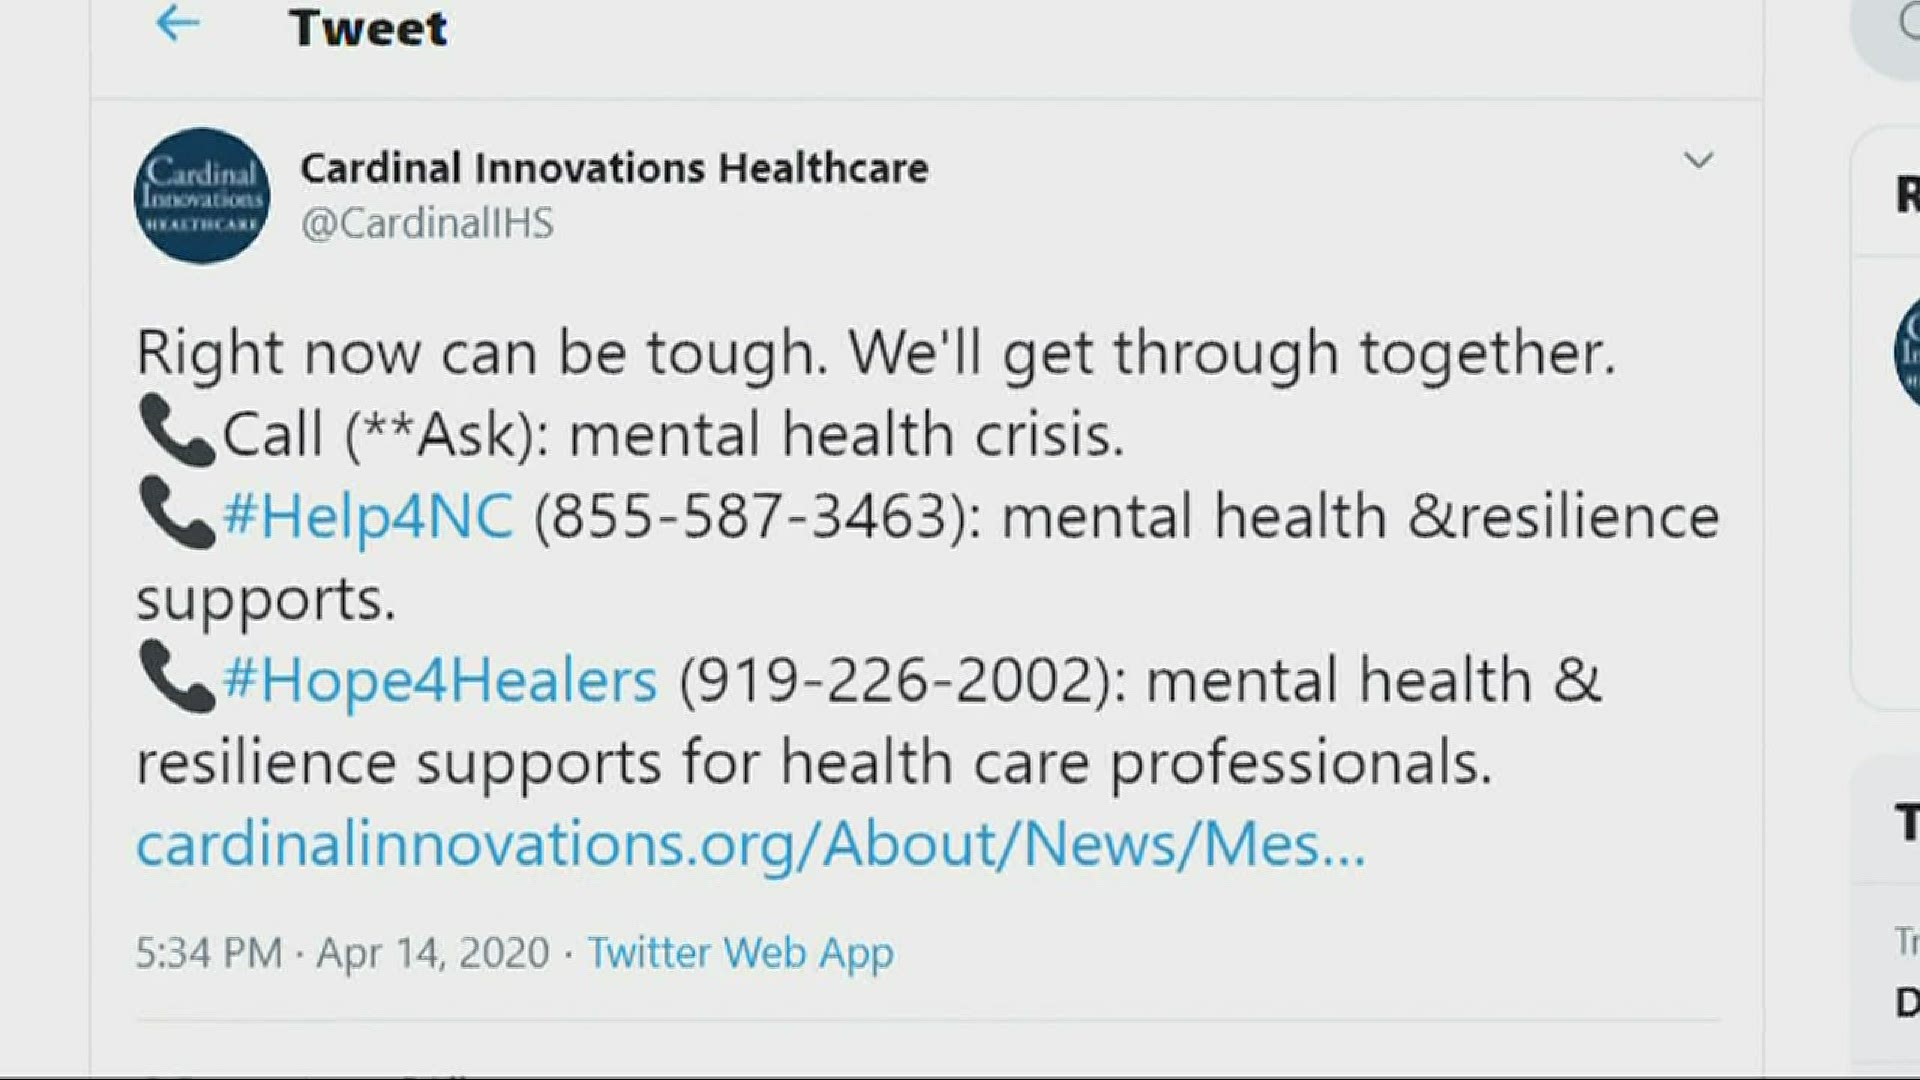 Cardinal Innovations Healthcare launched a mental health crisis hotline, ** ask, that will immediately connect callers with quick and appropriate assistance.